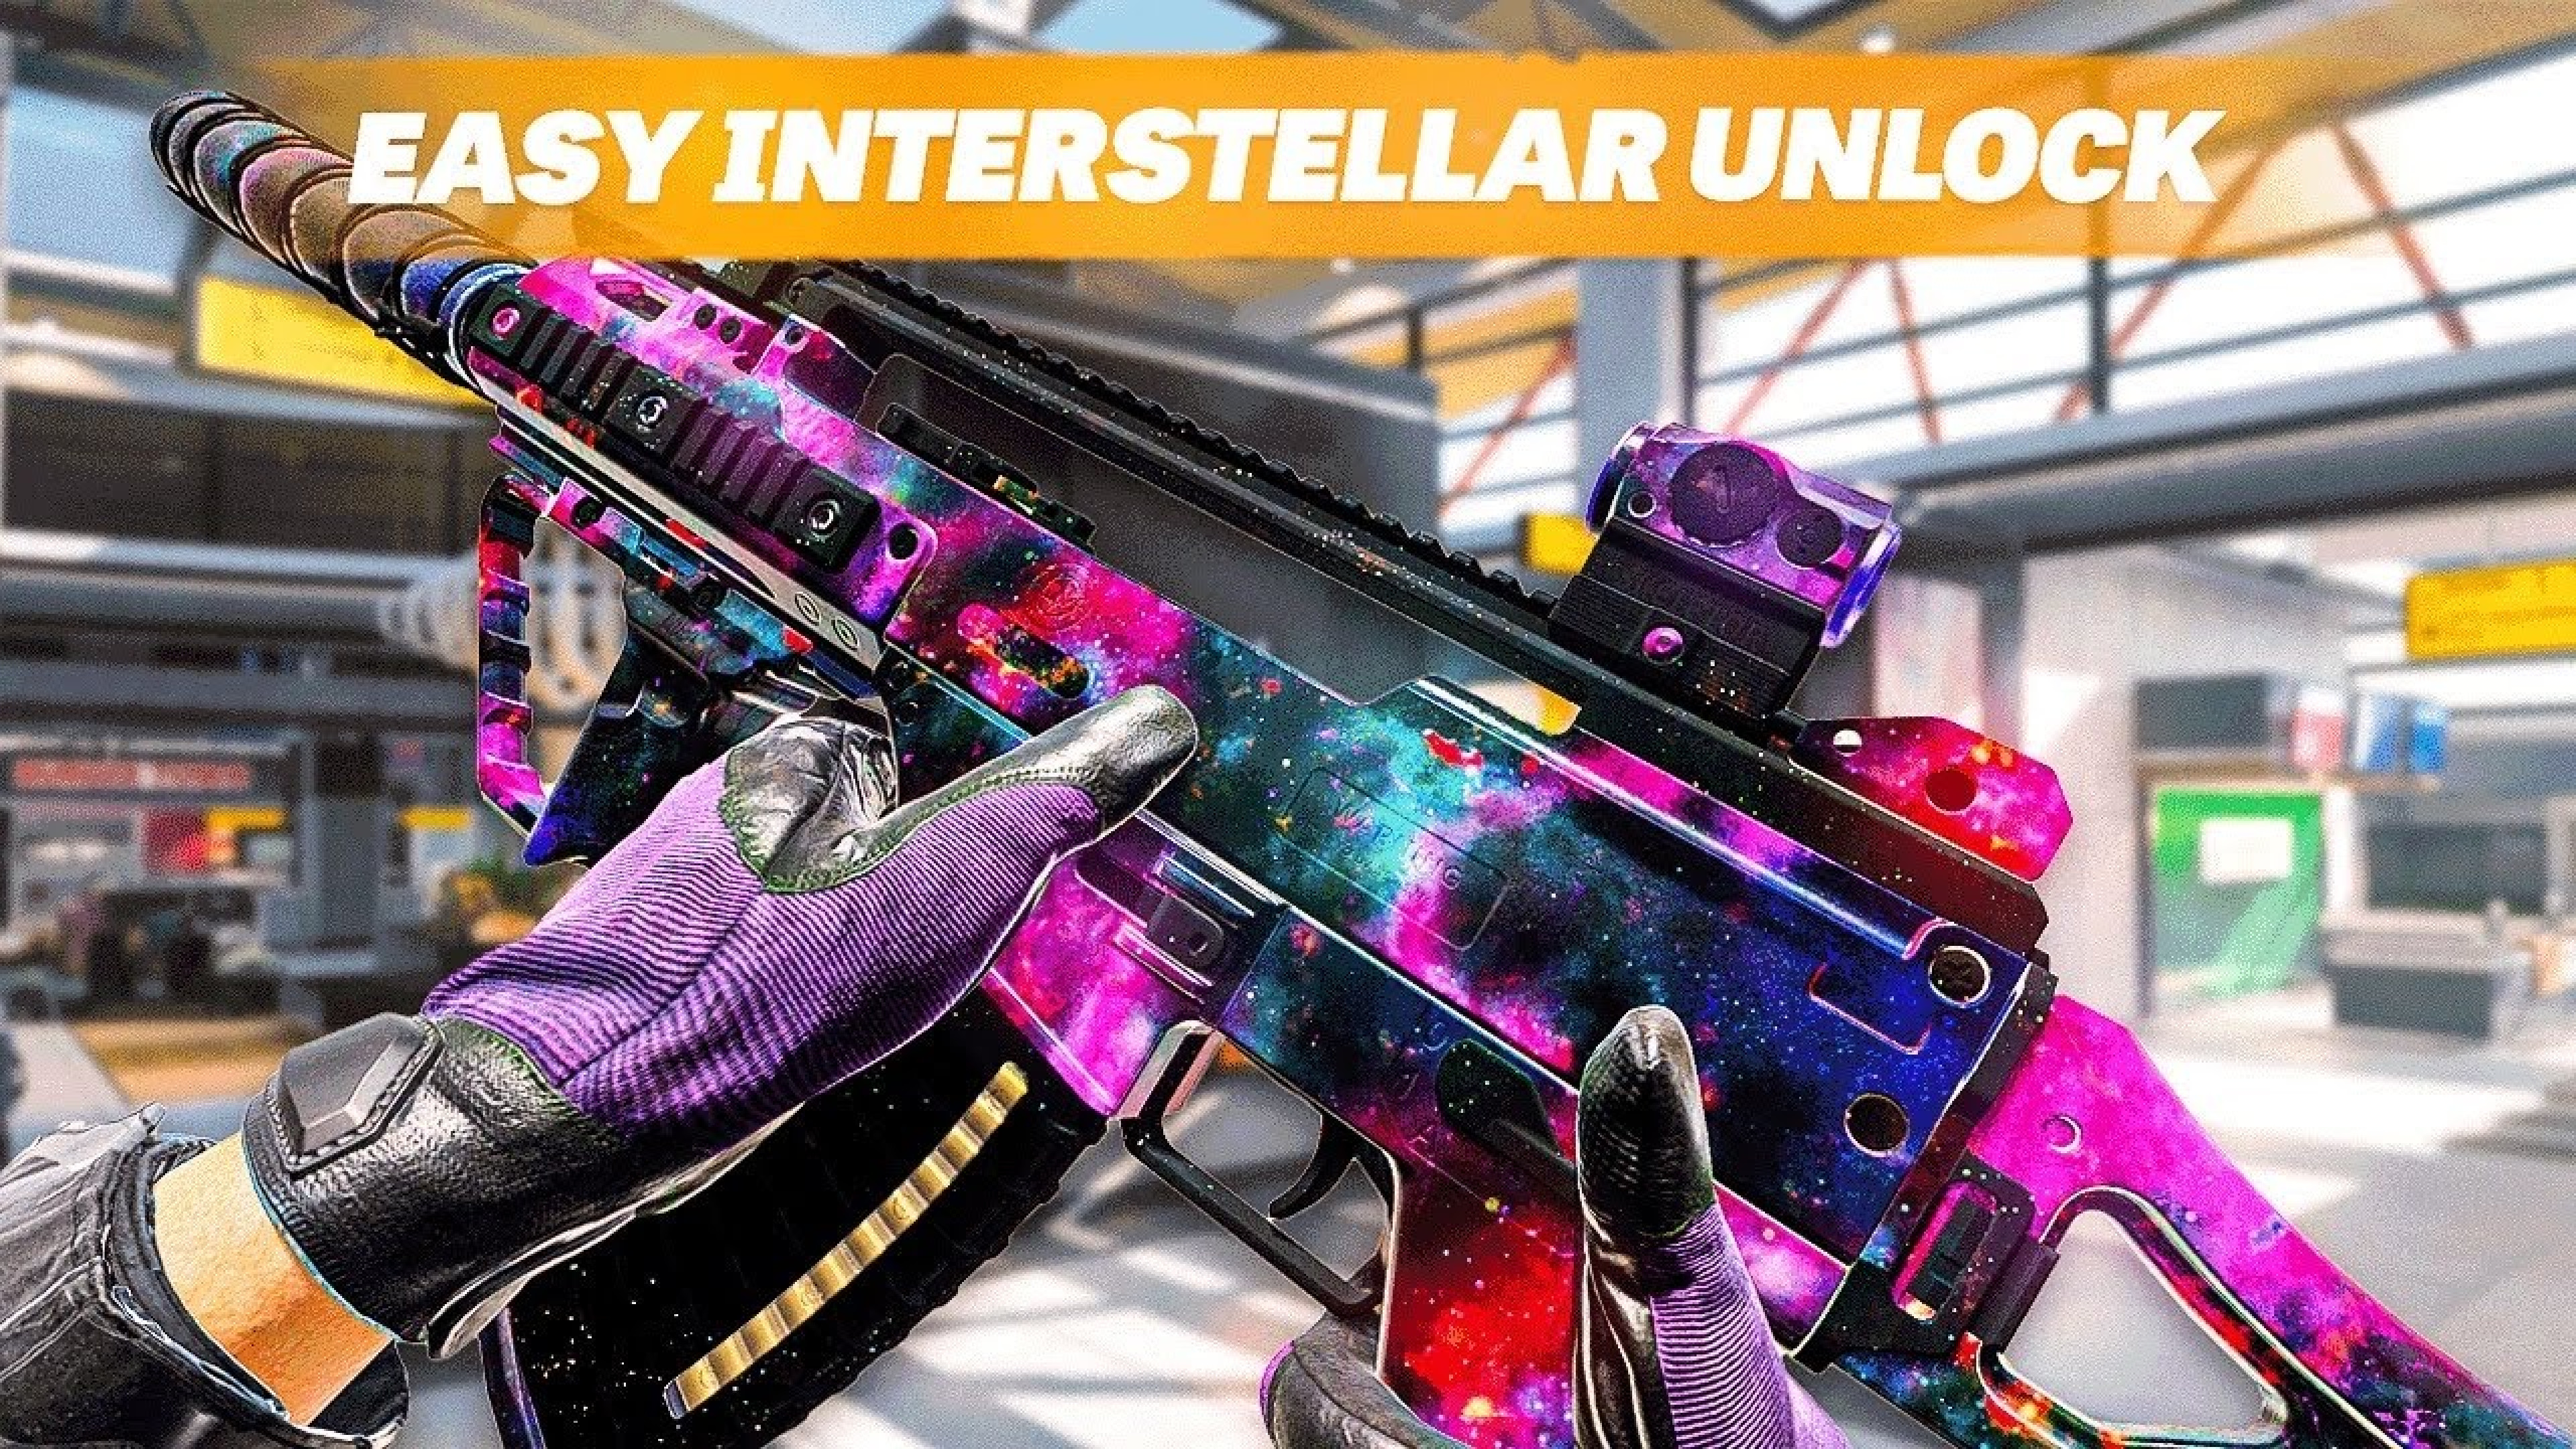 MW3 Weapons Camo Challenge Gilded▸Forged▸Priceless▸Interstellar  A To Z (Any Platform)